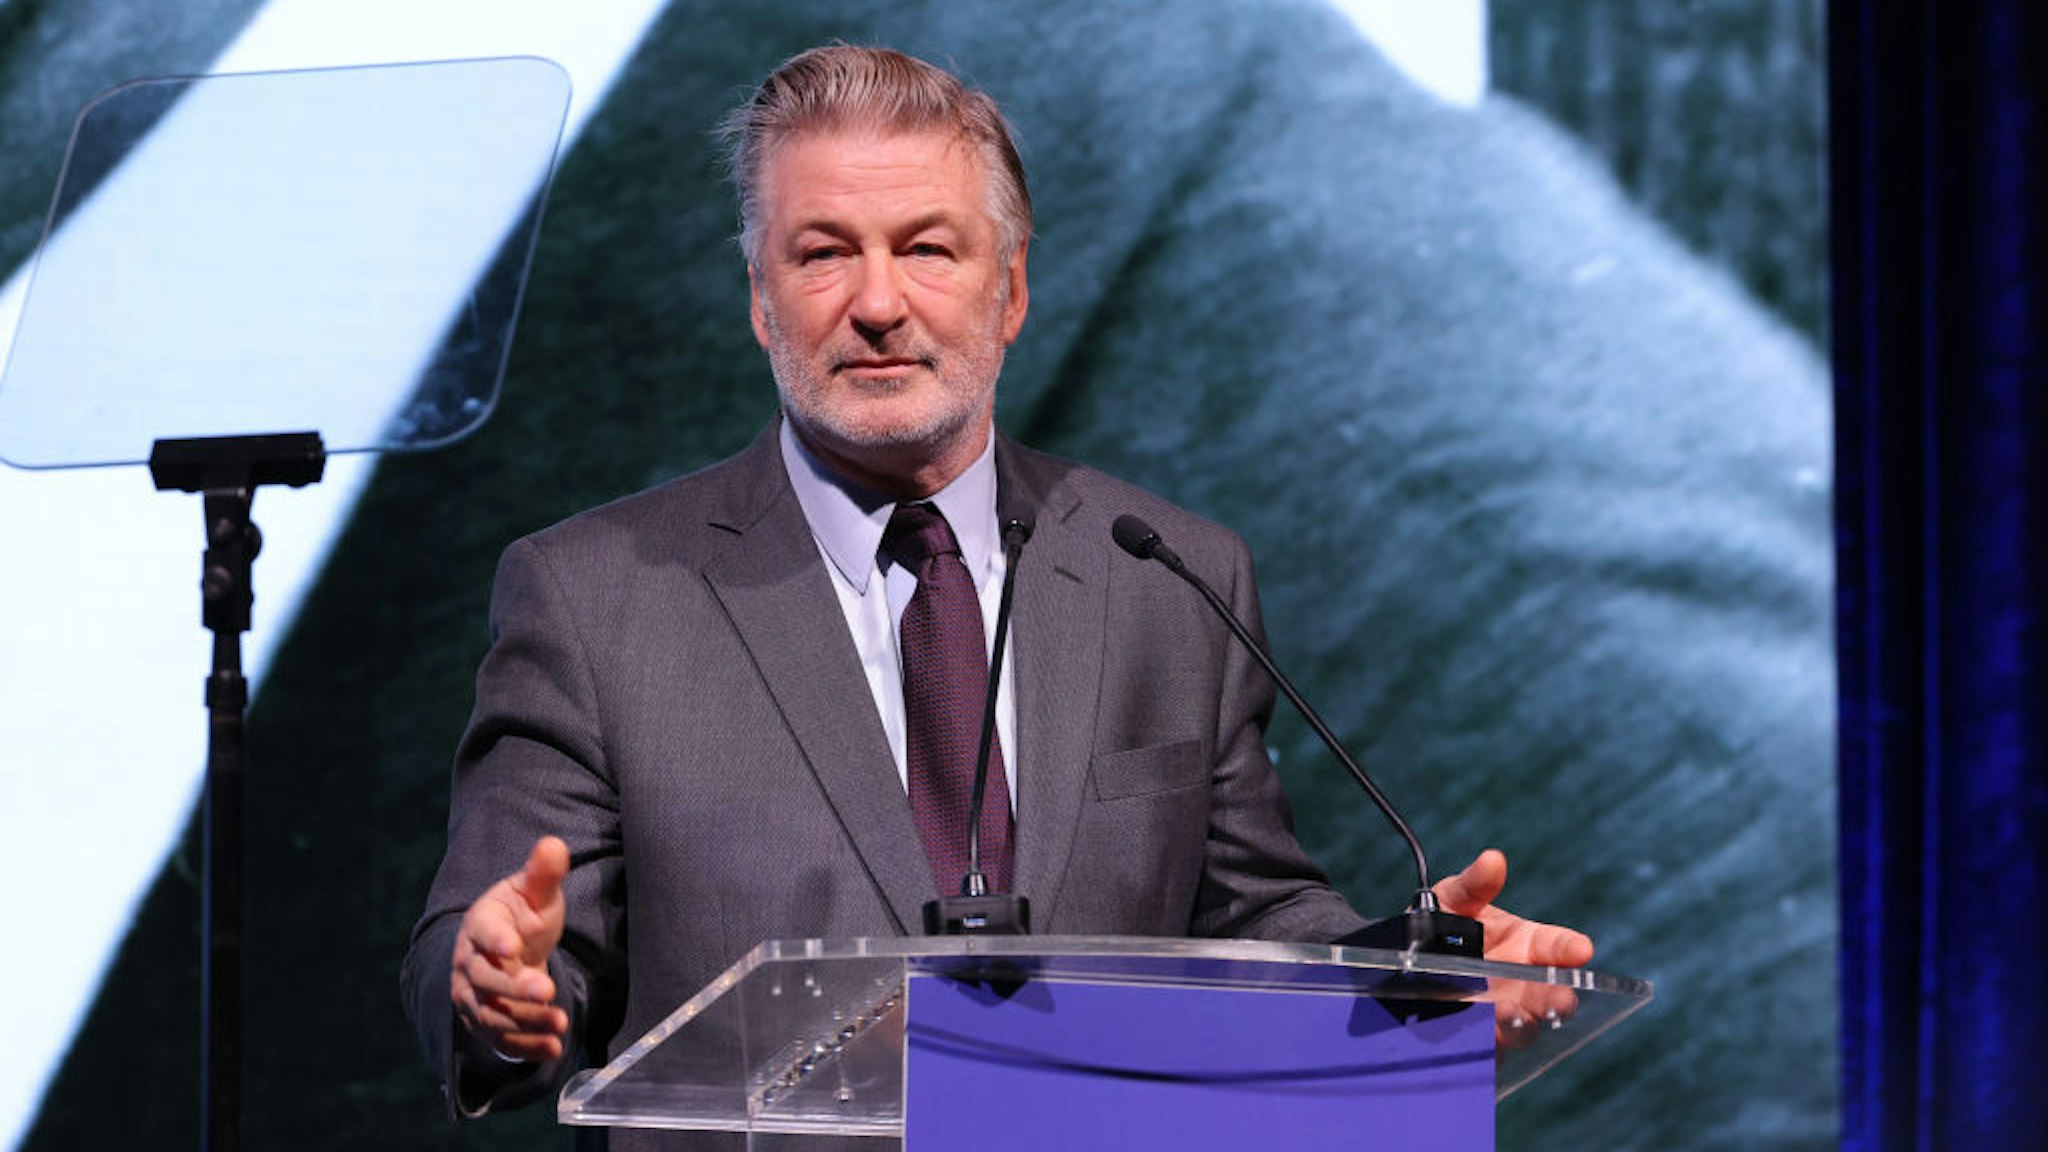 NEW YORK, NEW YORK - DECEMBER 06: Alec Baldwin speaks onstage at the 2022 Robert F. Kennedy Human Rights Ripple of Hope Gala at New York Hilton on December 06, 2022 in New York City. (Photo by Mike Coppola/Getty Images for 2022 Robert F. Kennedy Human Rights Ripple of Hope Gala)